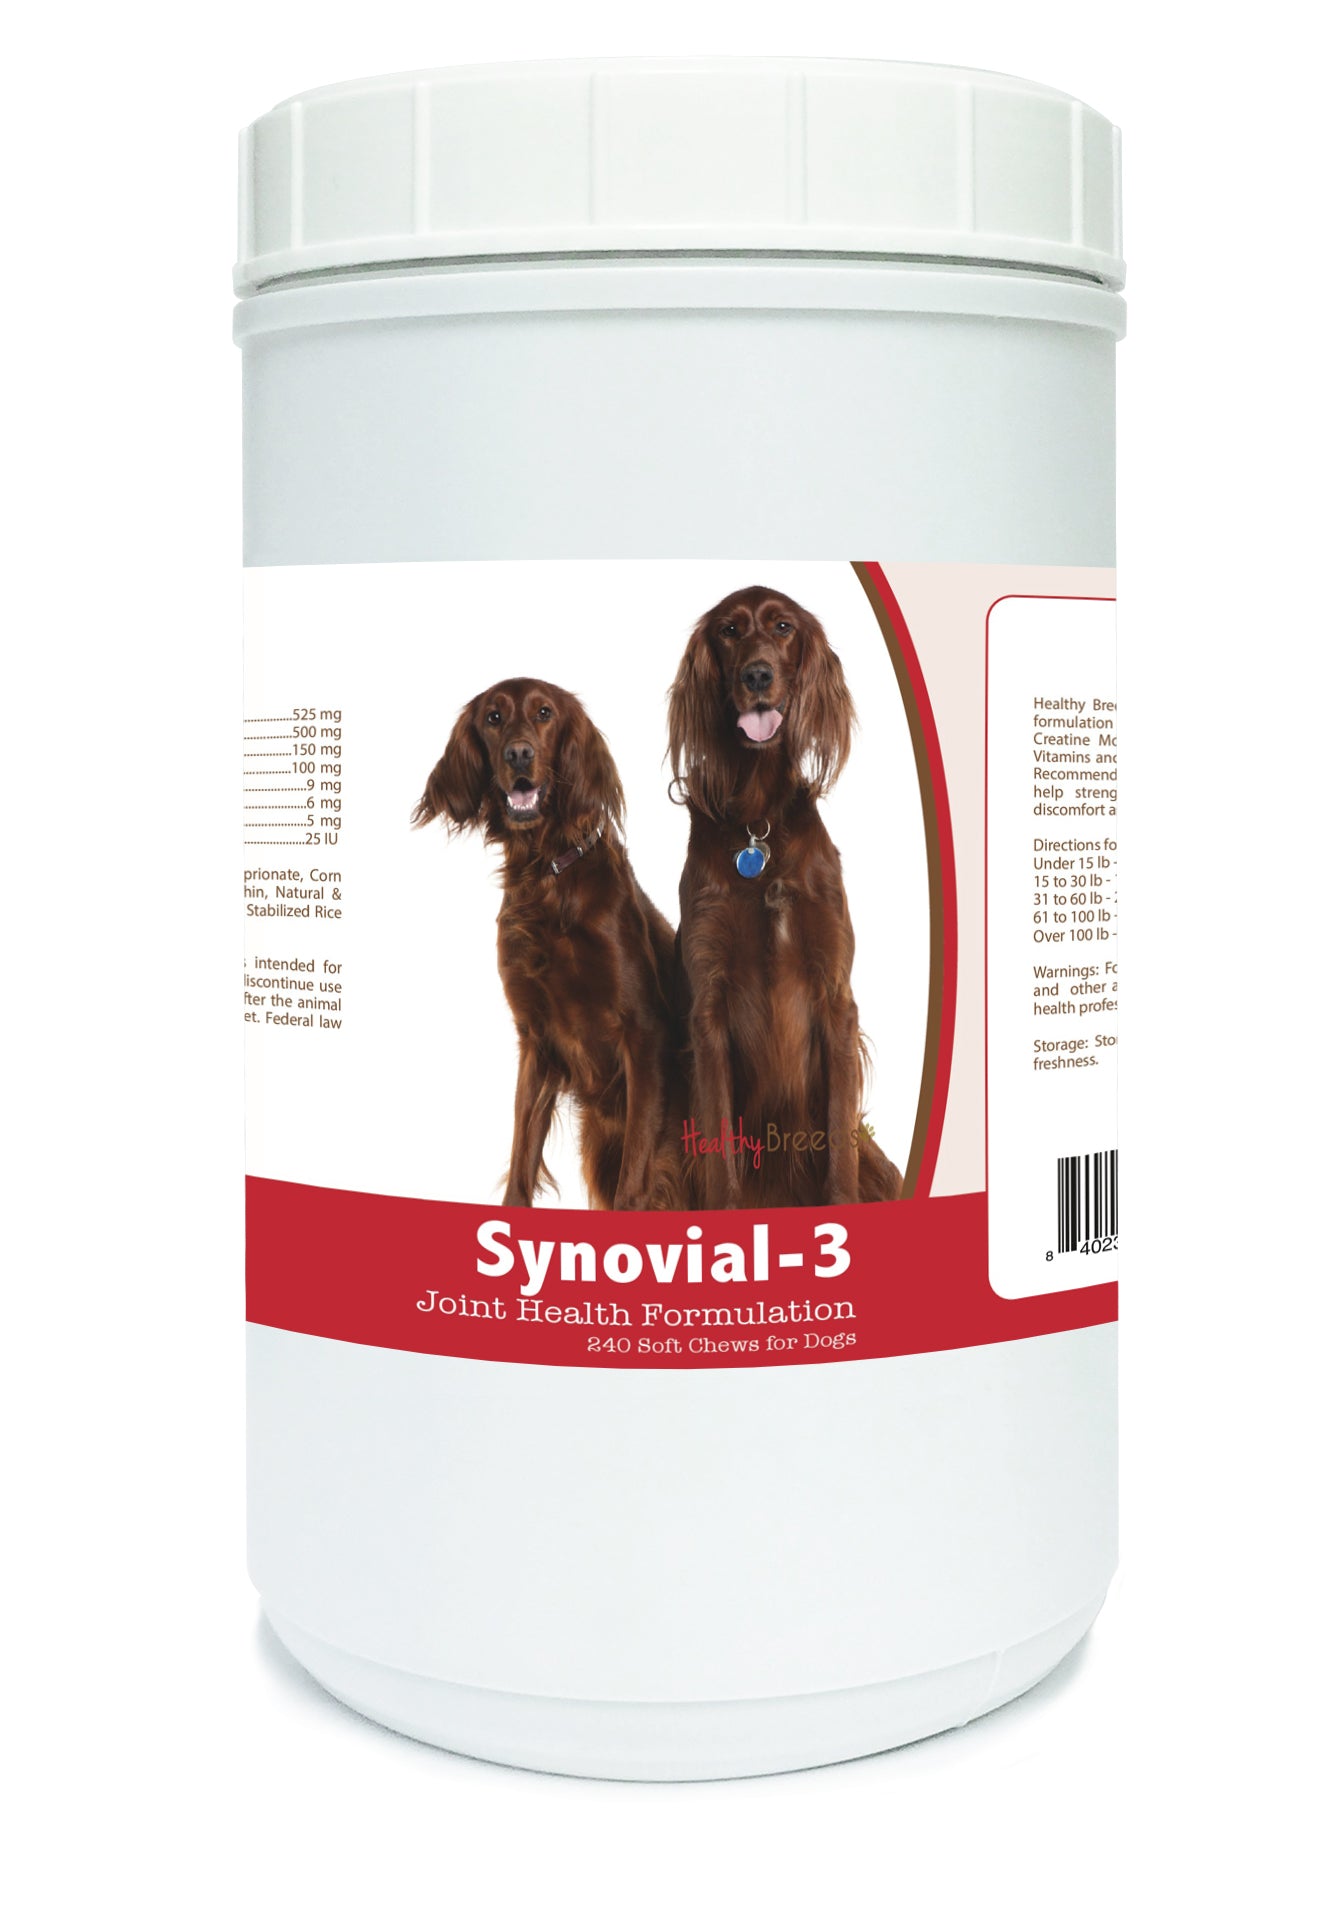 Irish Setter Synovial-3 Joint Health Formulation Soft Chews 240 Count